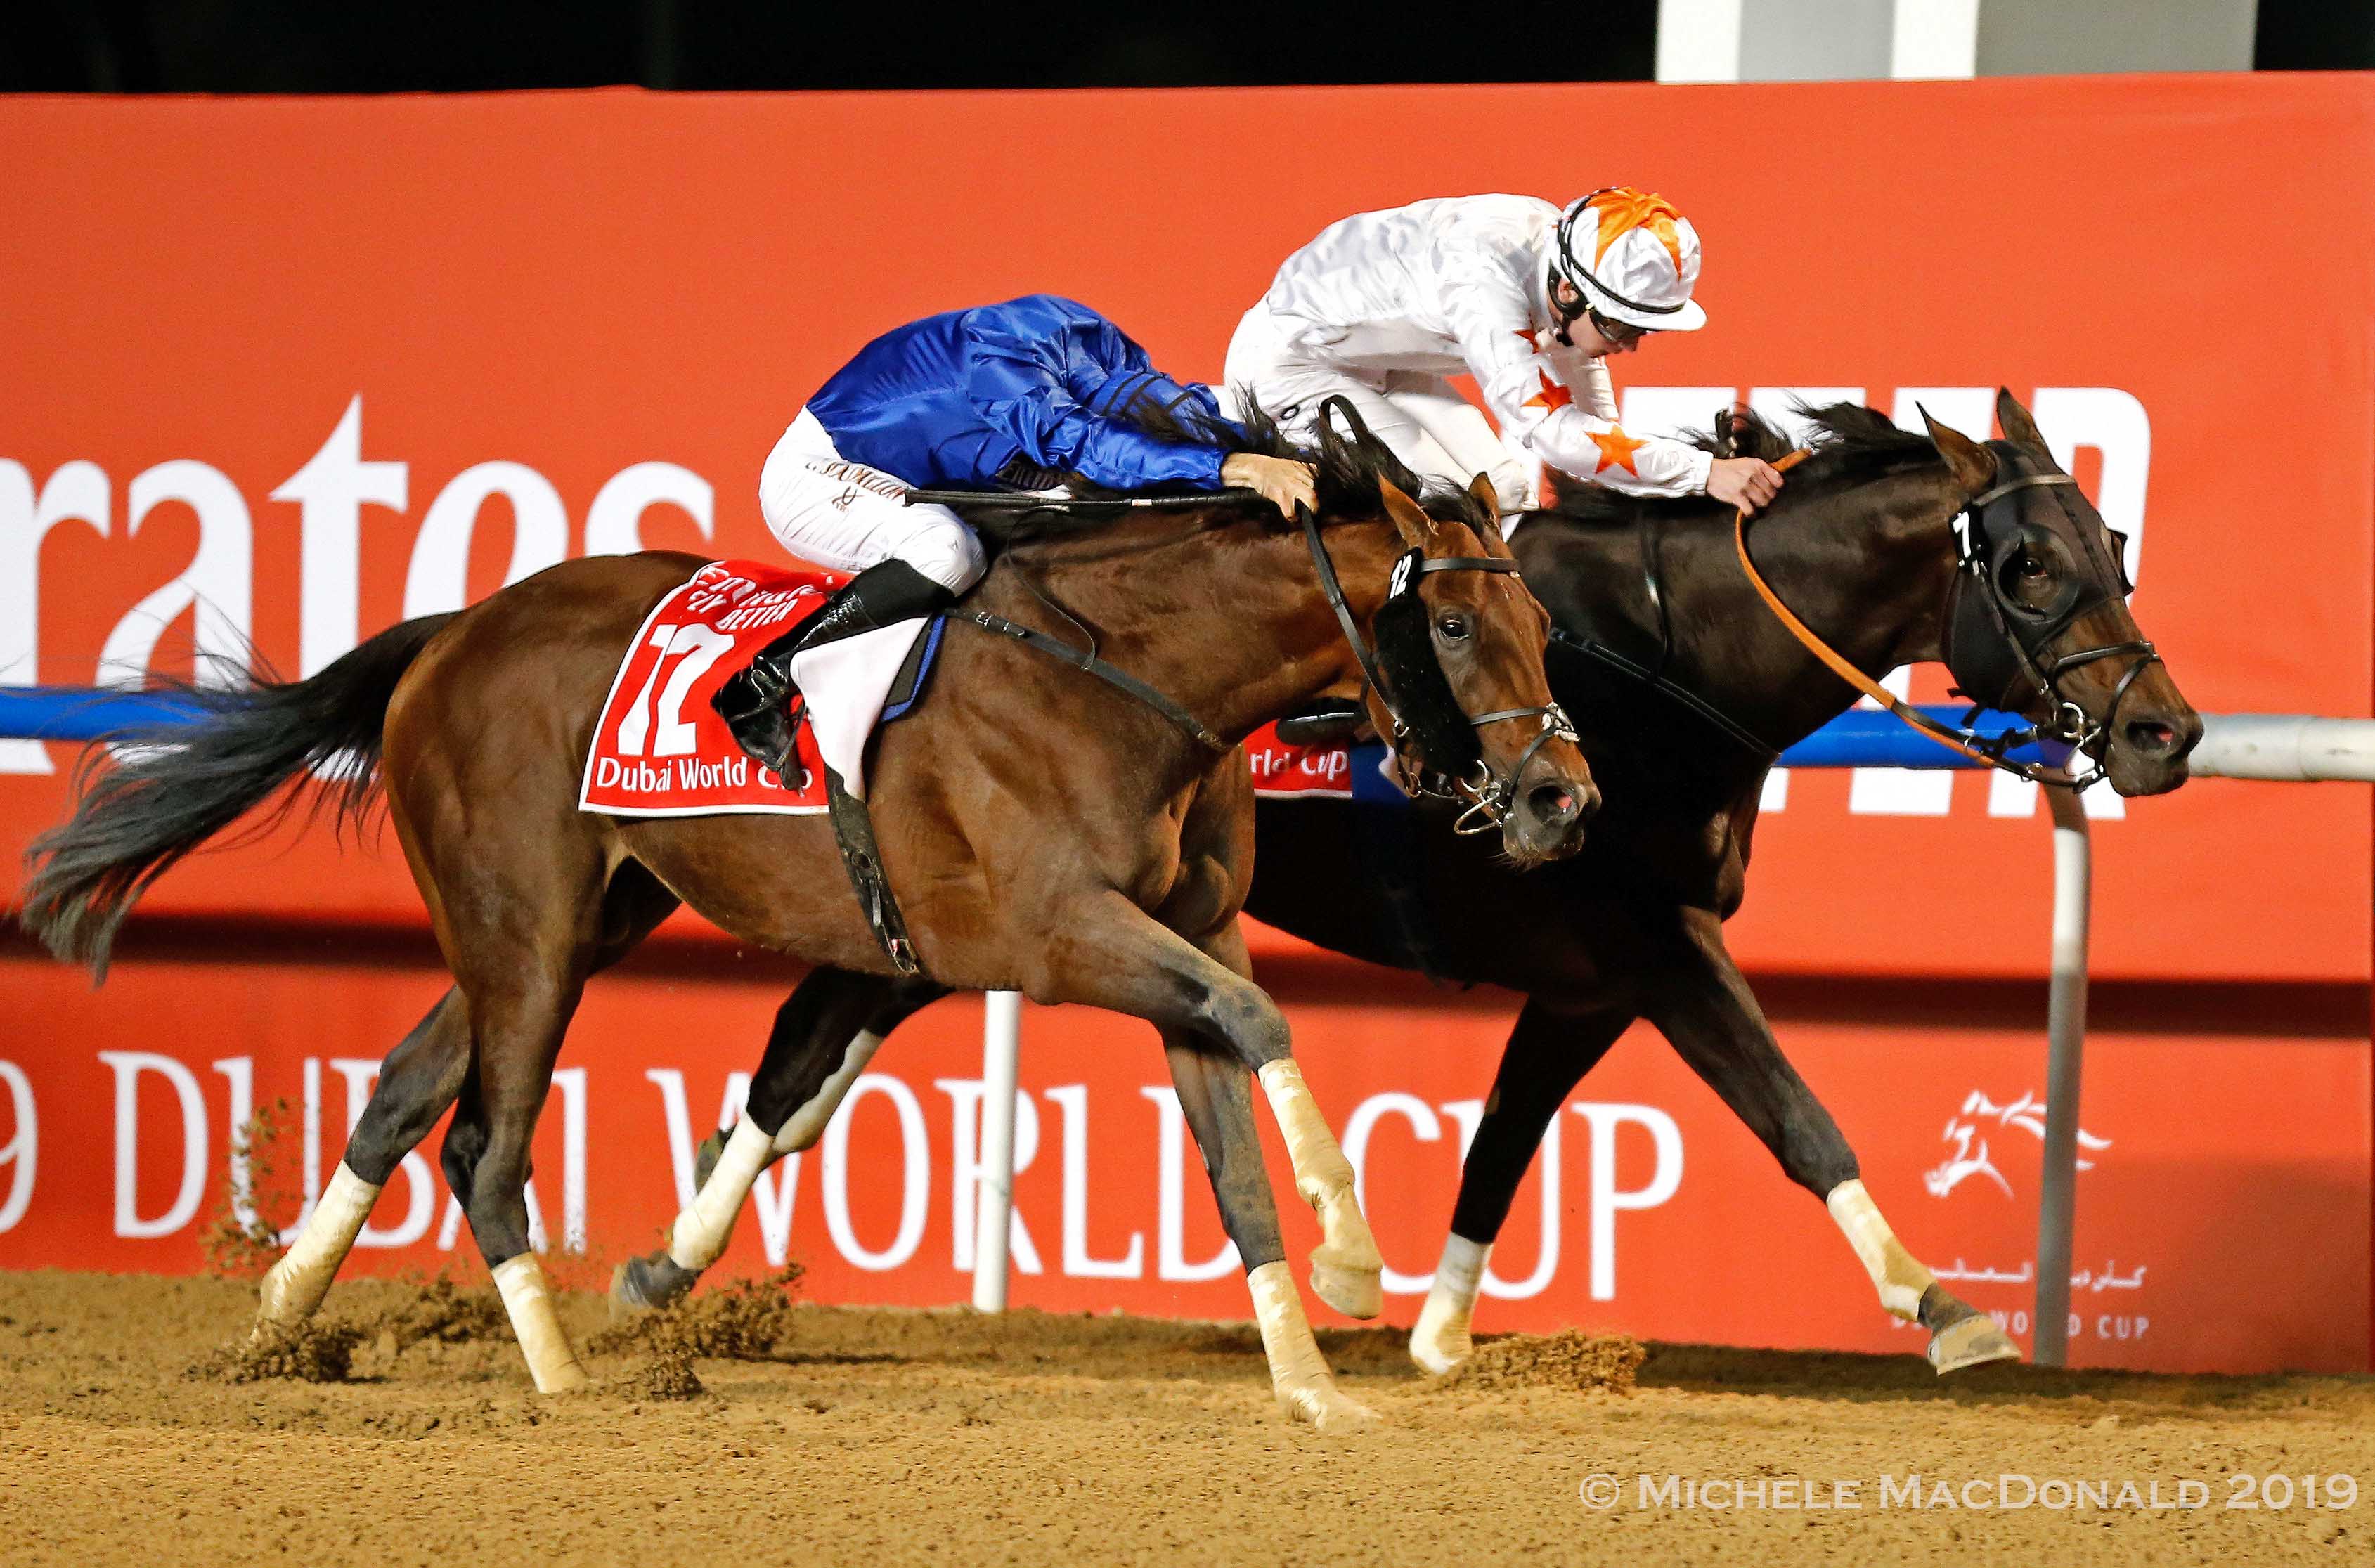 Never say die: Thunder Snow (near) refuses to yield to Gronkowski (Oisin Murphy) as they race to the wire in the Dubai World Cup. Photo: Michele MacDonald